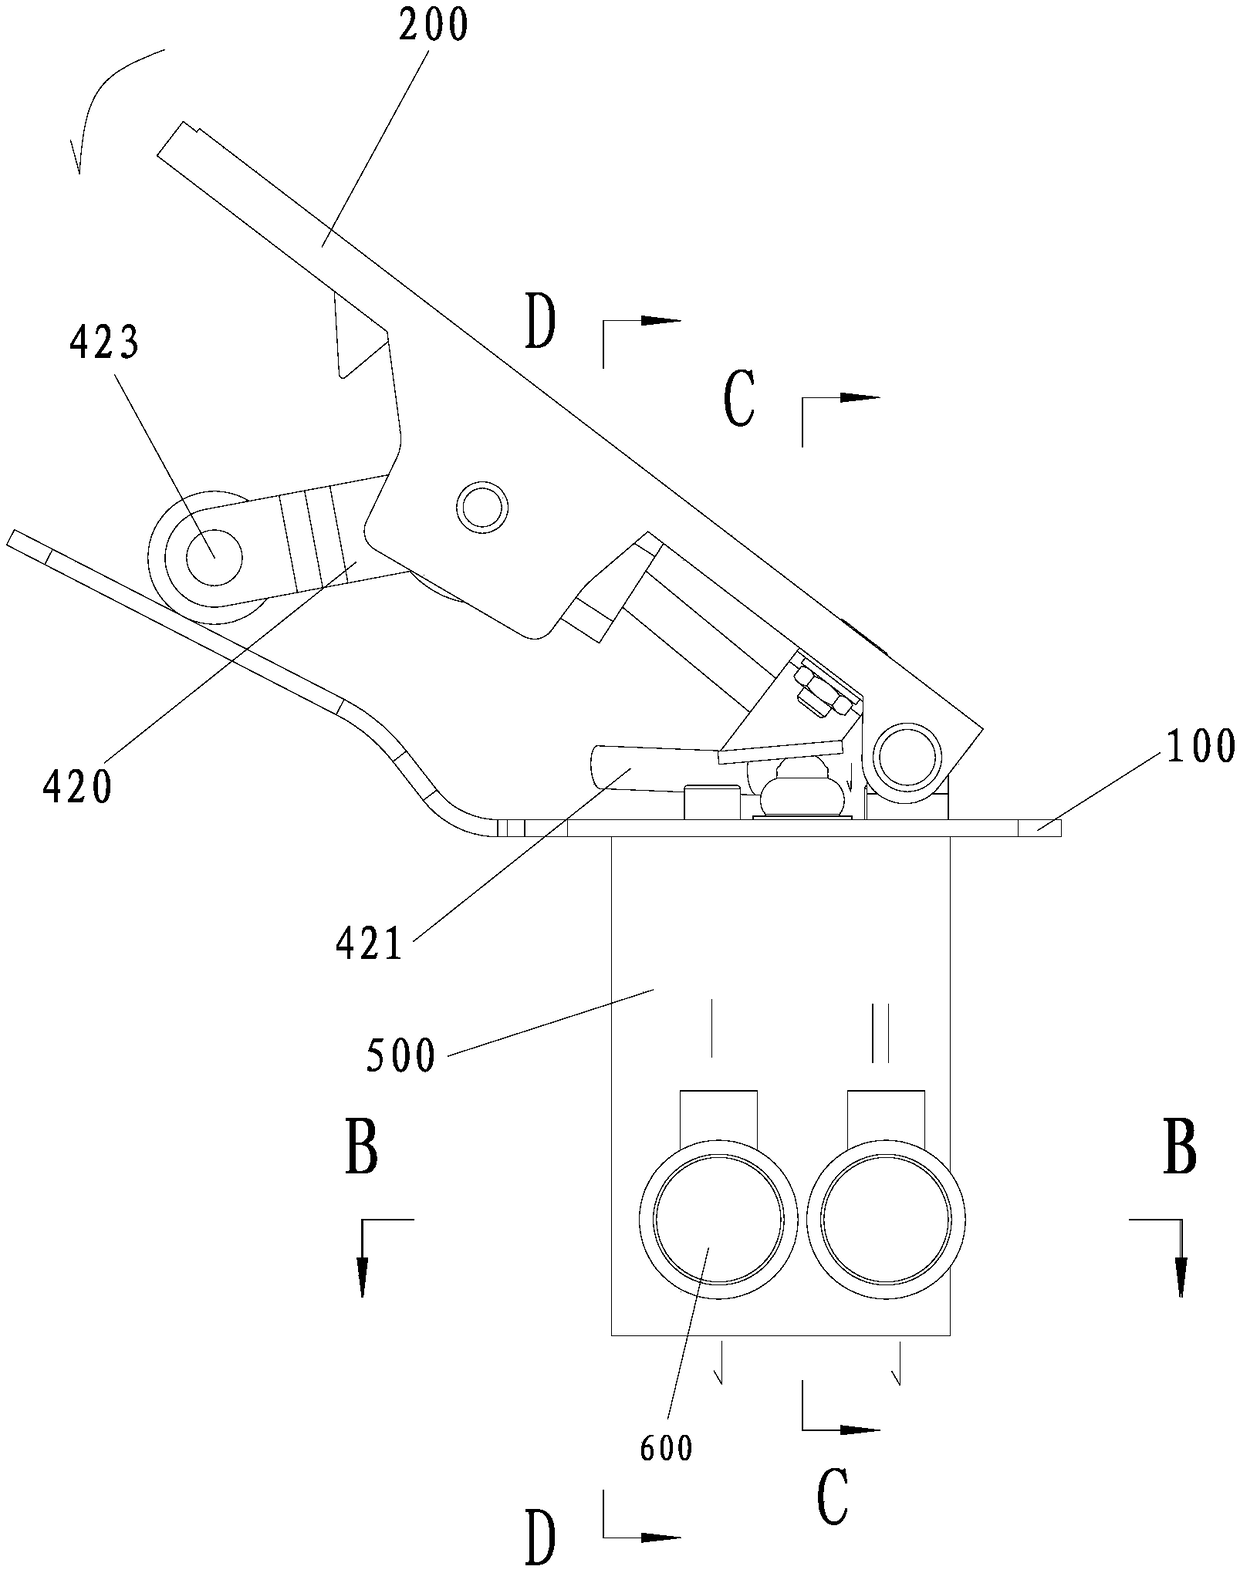 Engineering vehicle throttle and traveling control system and method